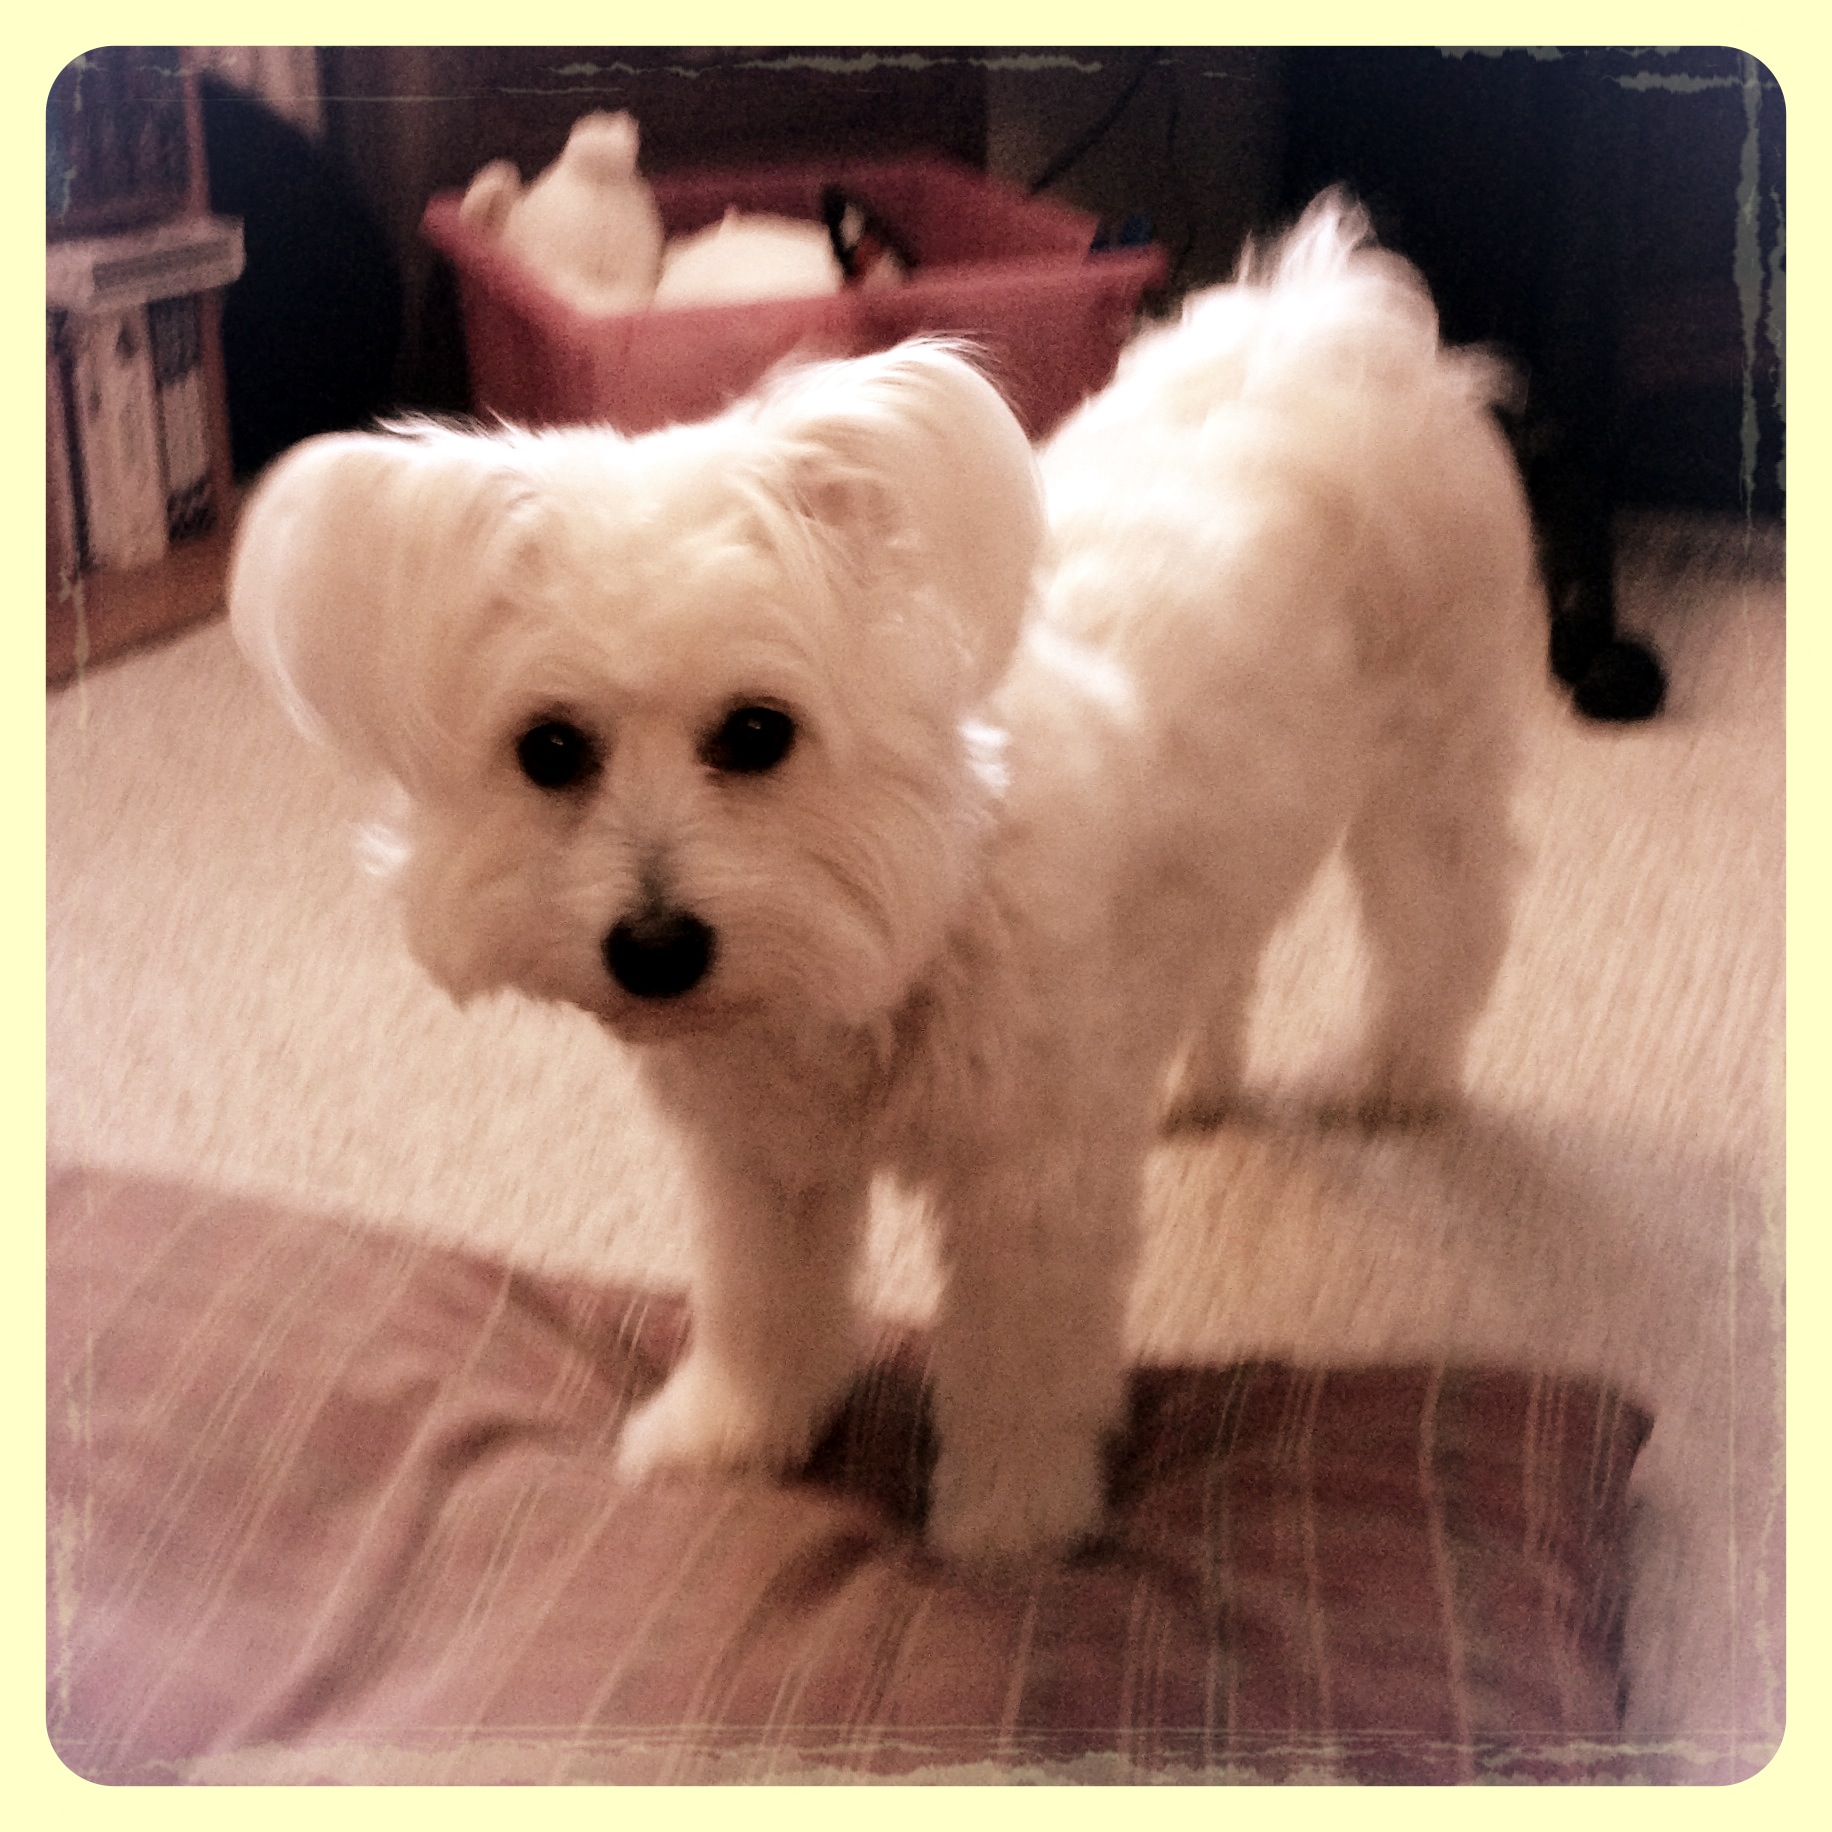 a small white dog with big ears standing on a carpet